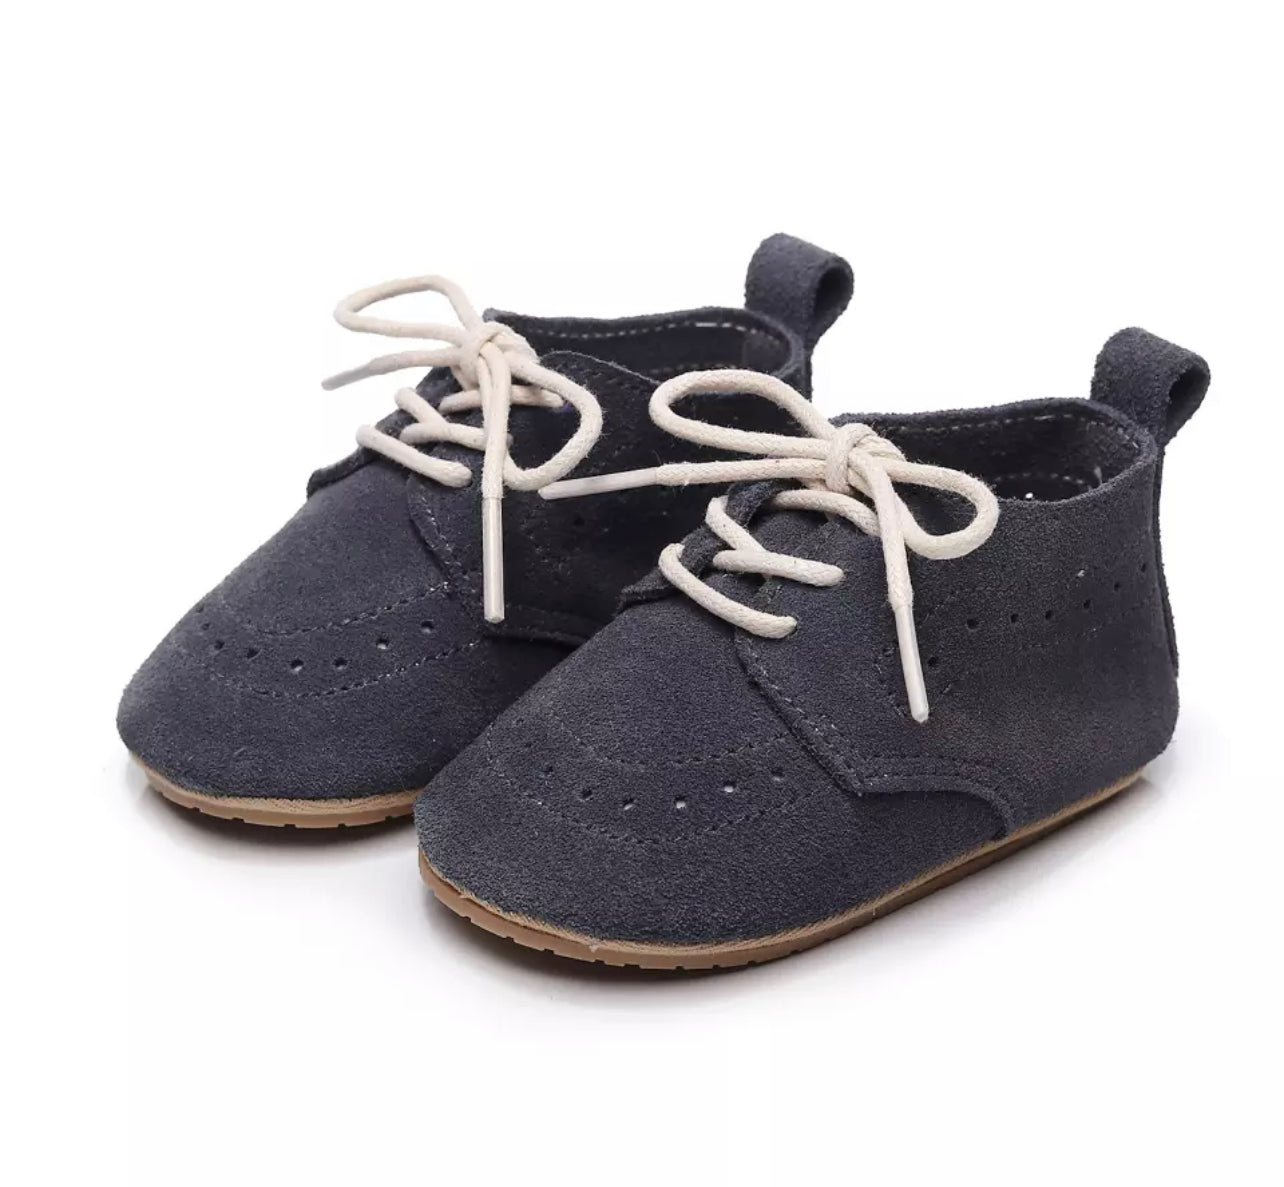 The Suede Winter Shoes - 2 Colors